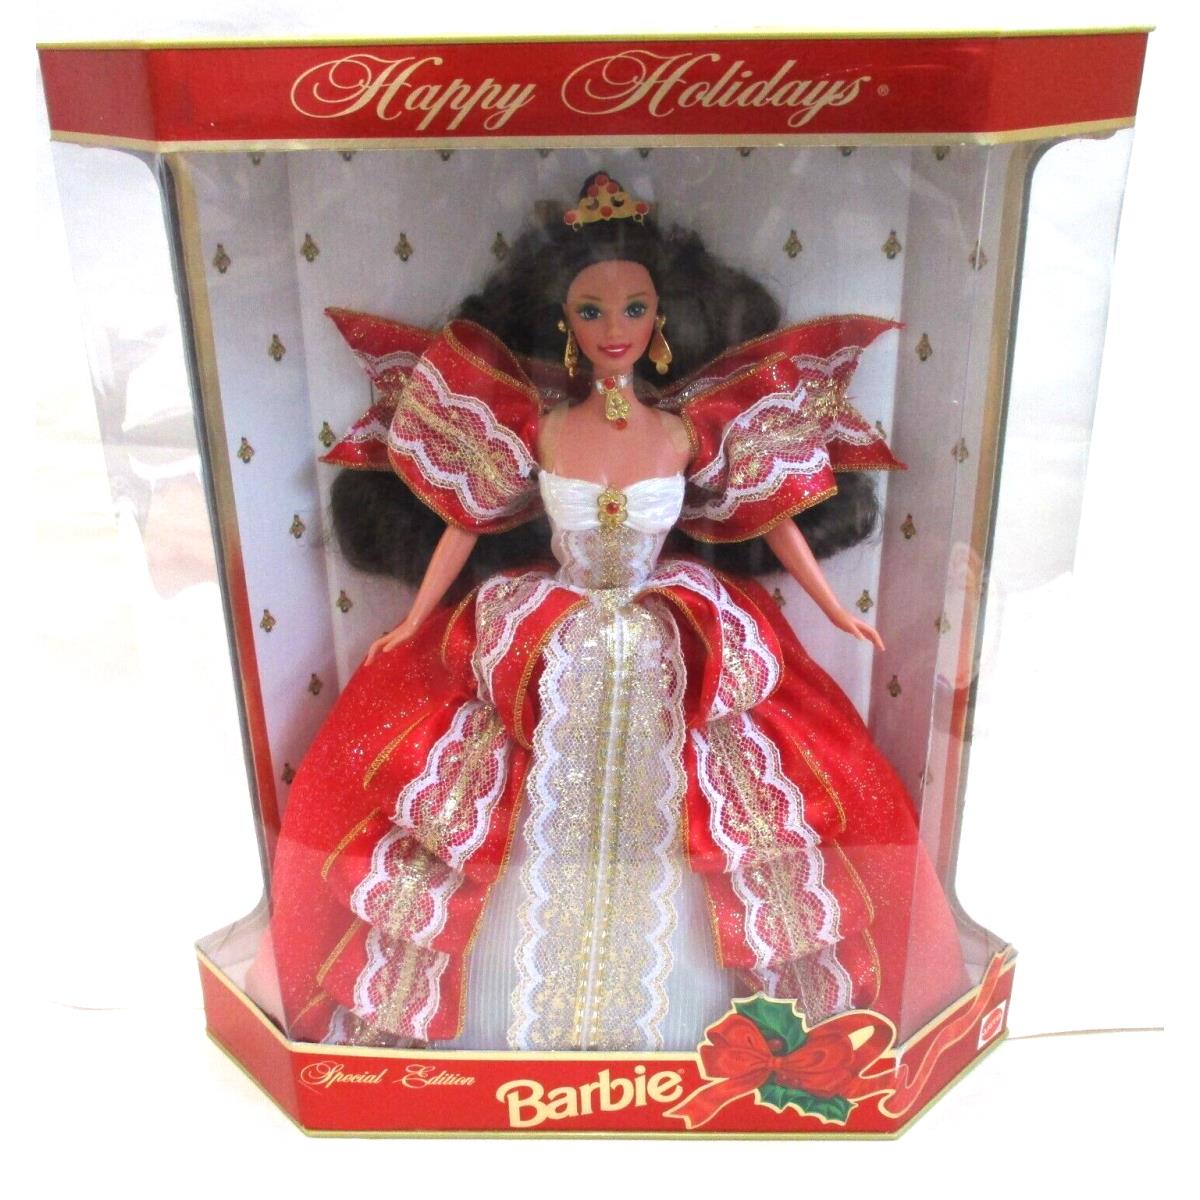 1997 Mattel Happy Holidays Special Edition Barbie Rare Green Eyes 17832